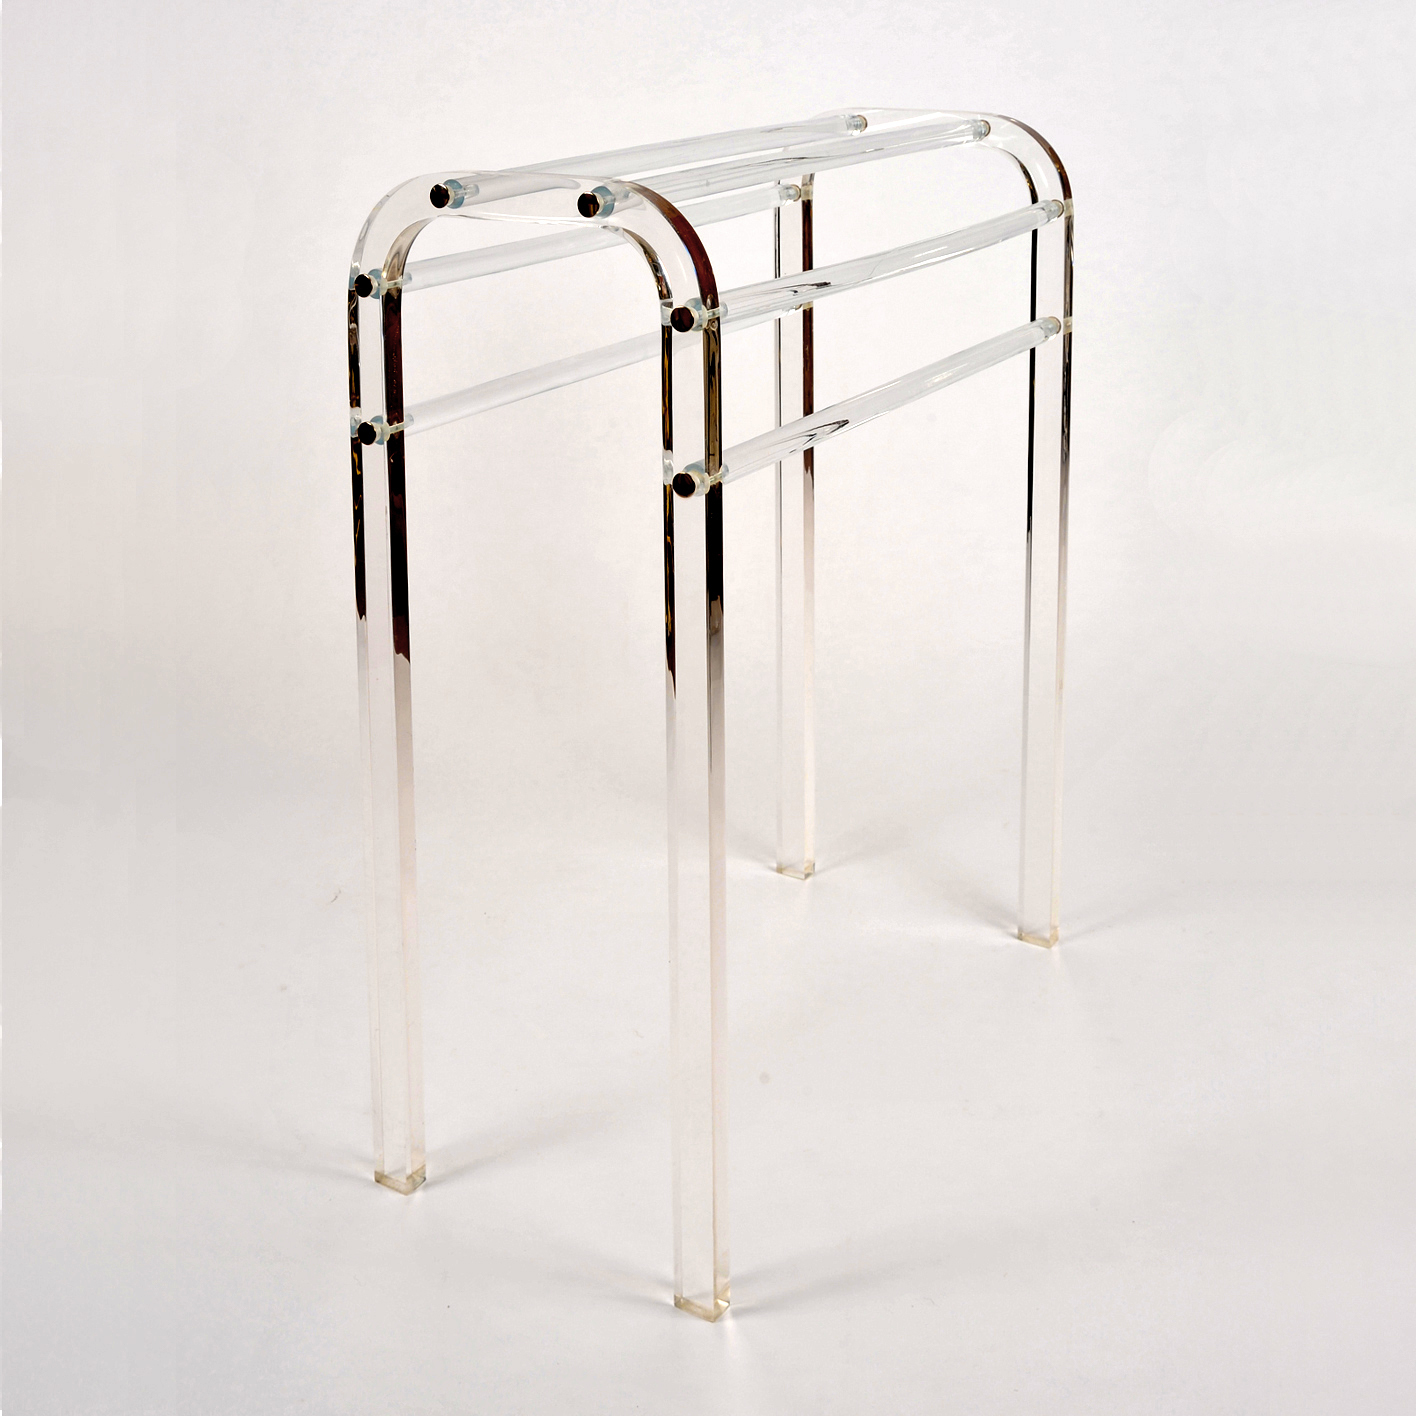 The image for Vw Lucite Towel Rail Detail 01